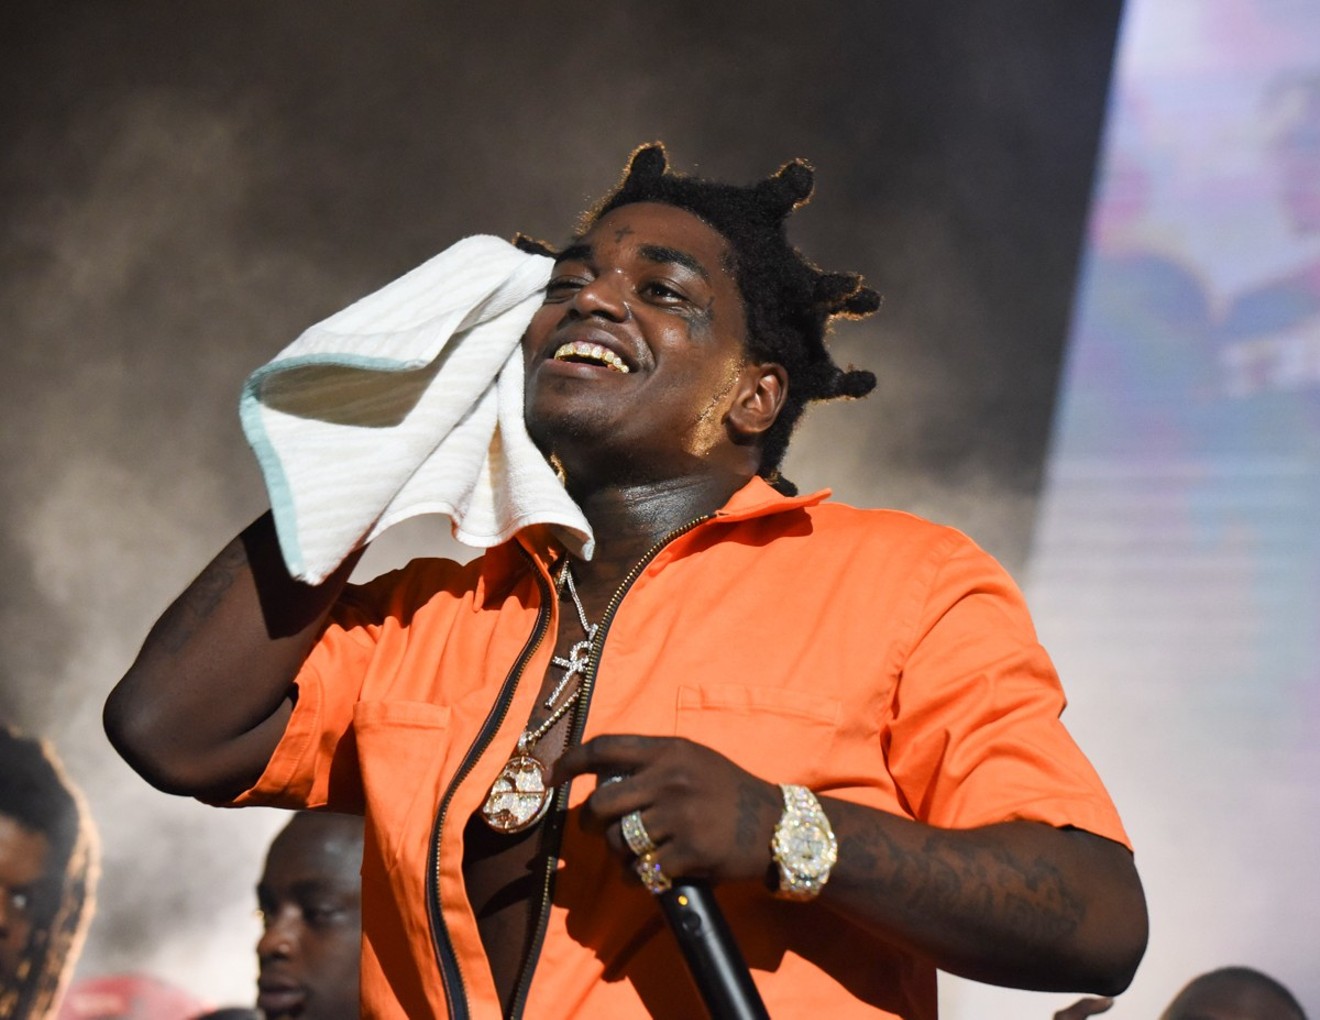 Kodak Black is facing two new felony gun charges in Miami-Dade County.